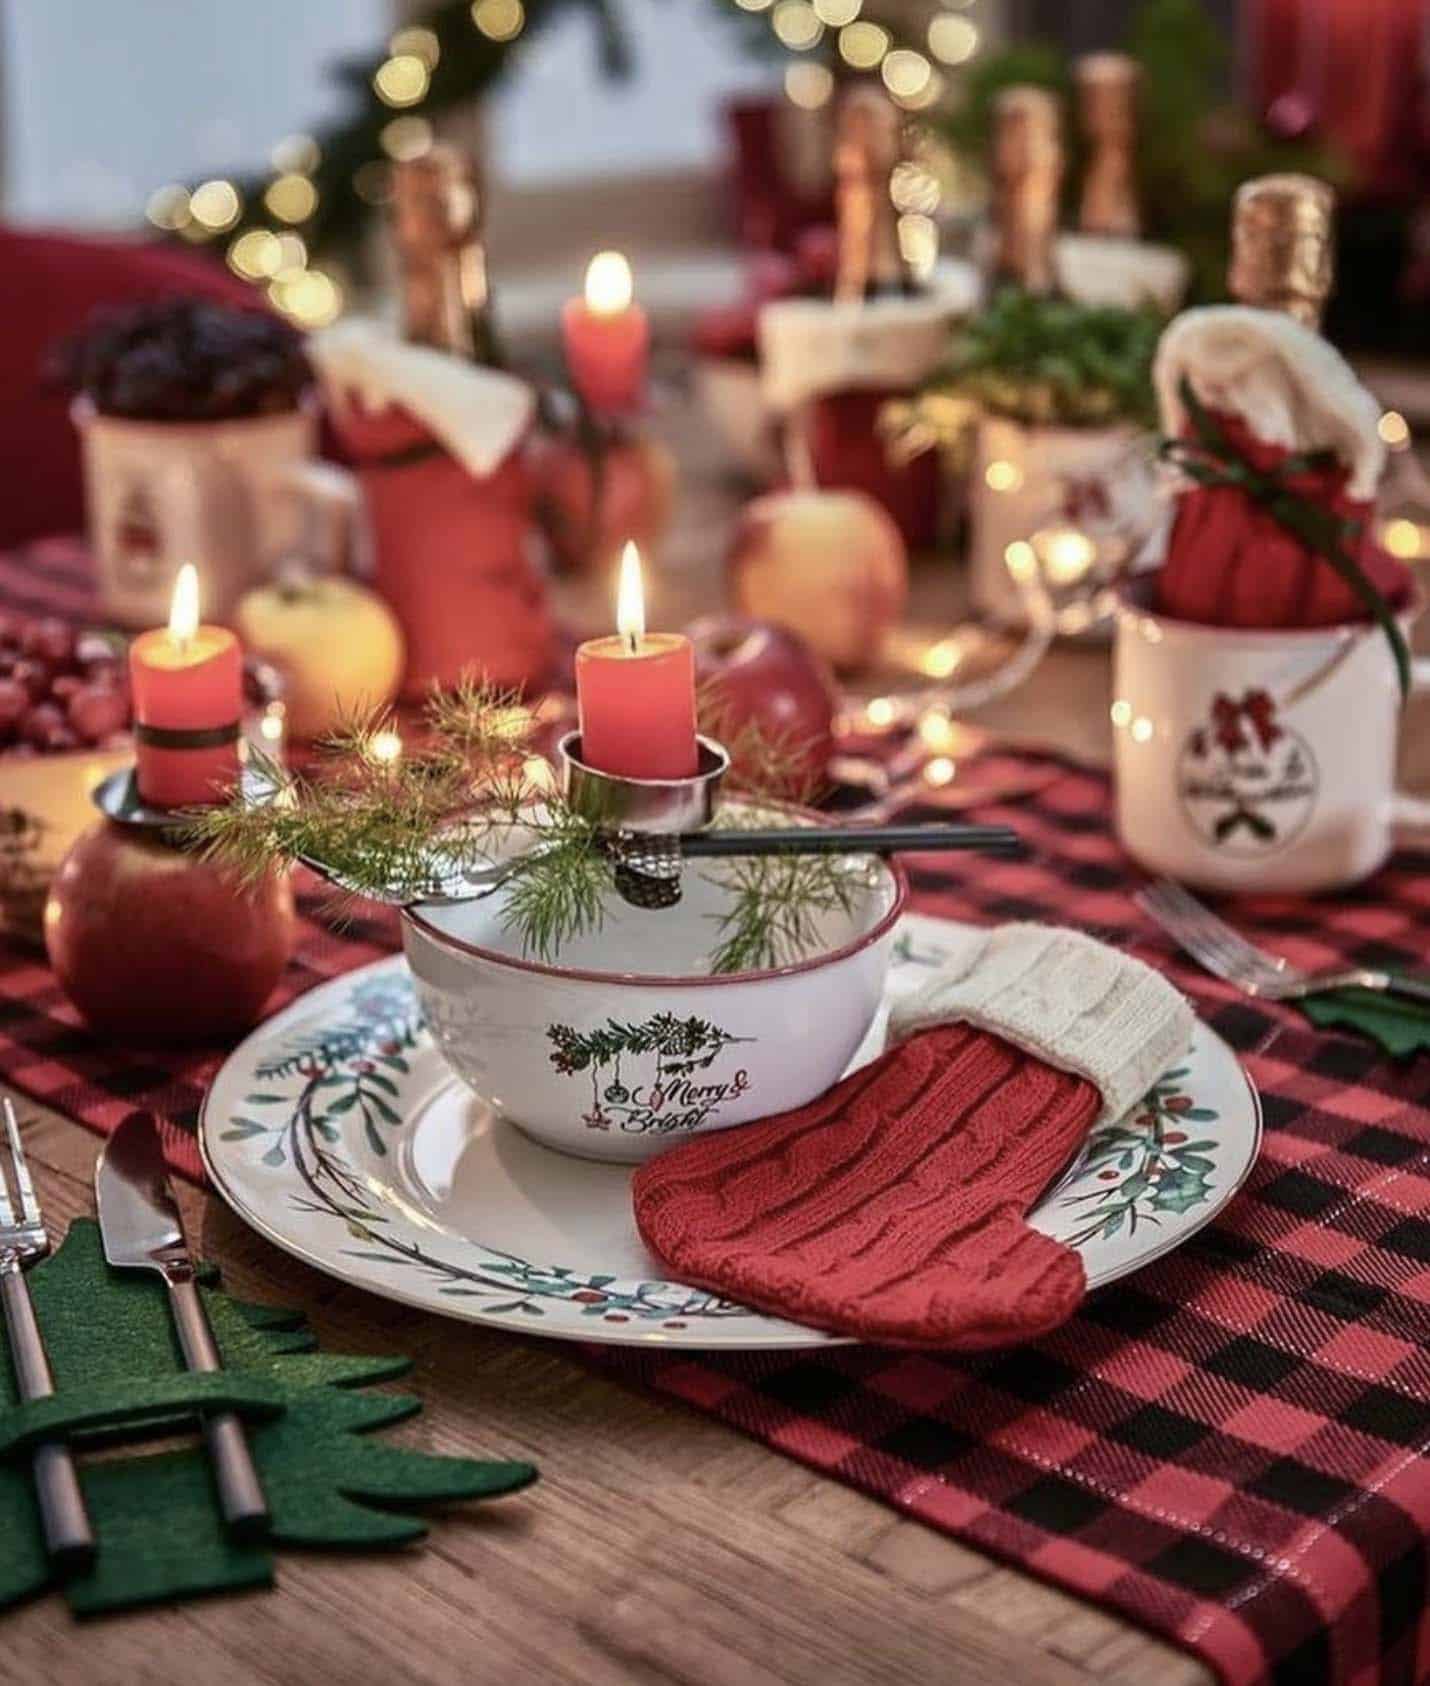 festive red and green dining table decor for Christmas